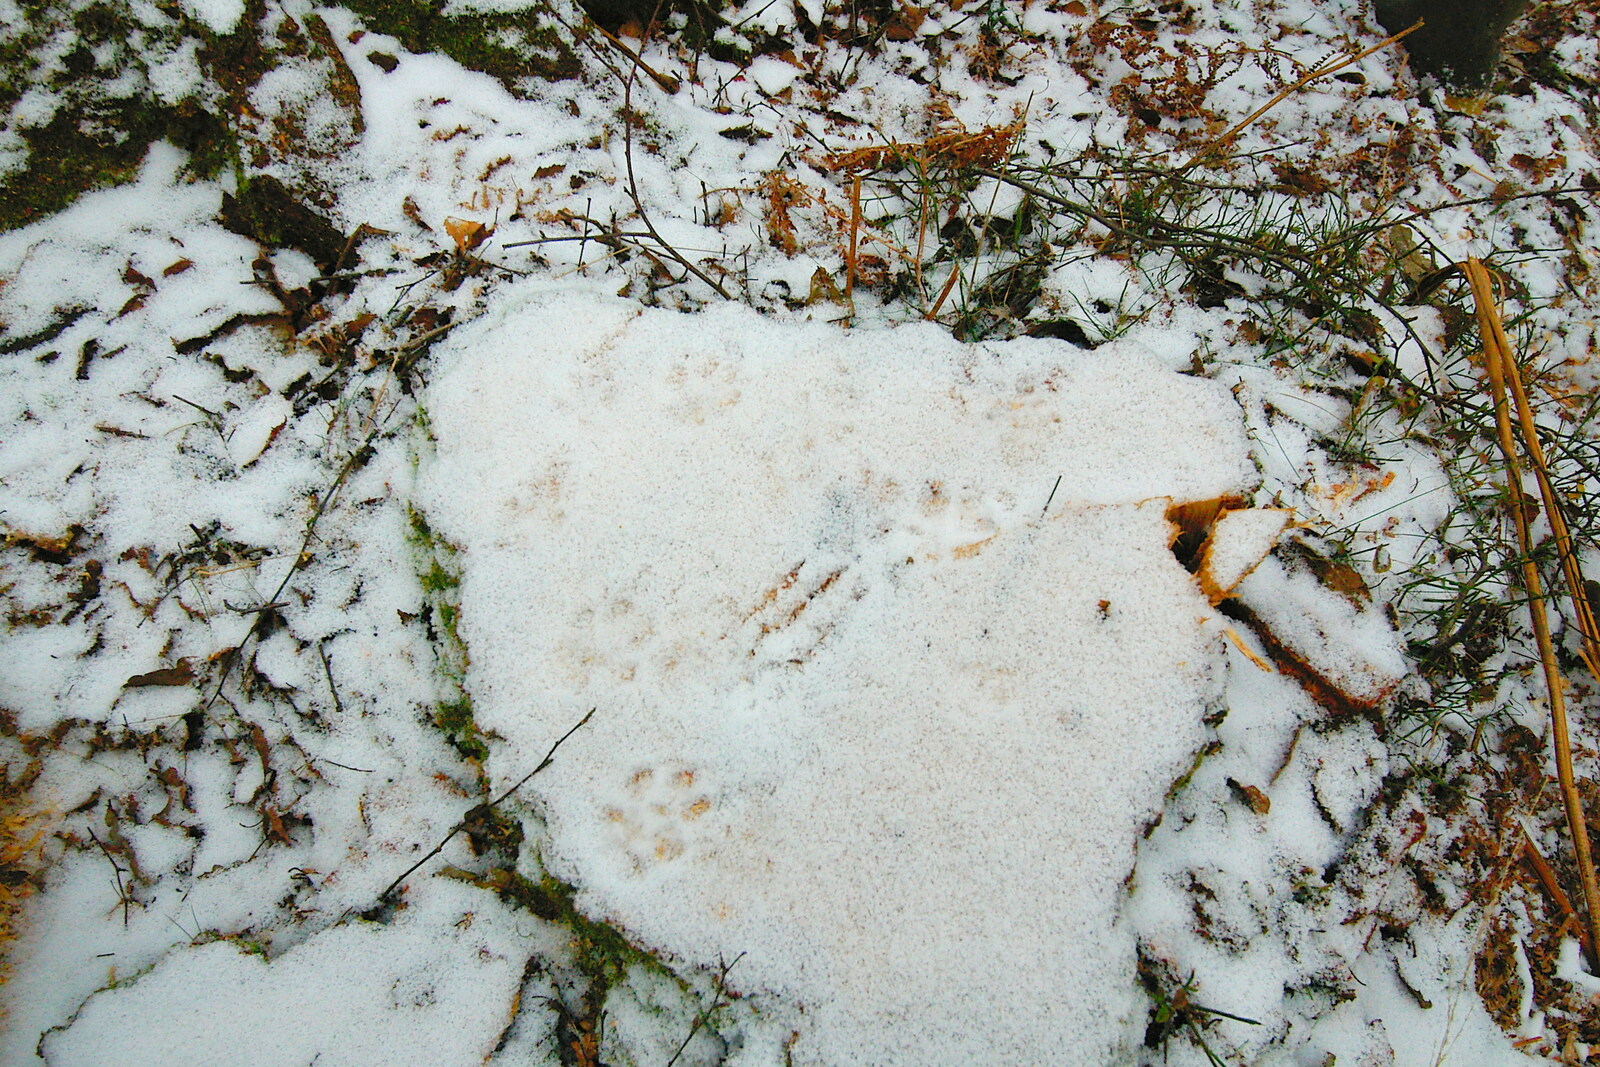 Fox tracks from Walk Like a Shadow: A Day With Ray Mears, Ashdown Forest, East Sussex - 29th December 2005